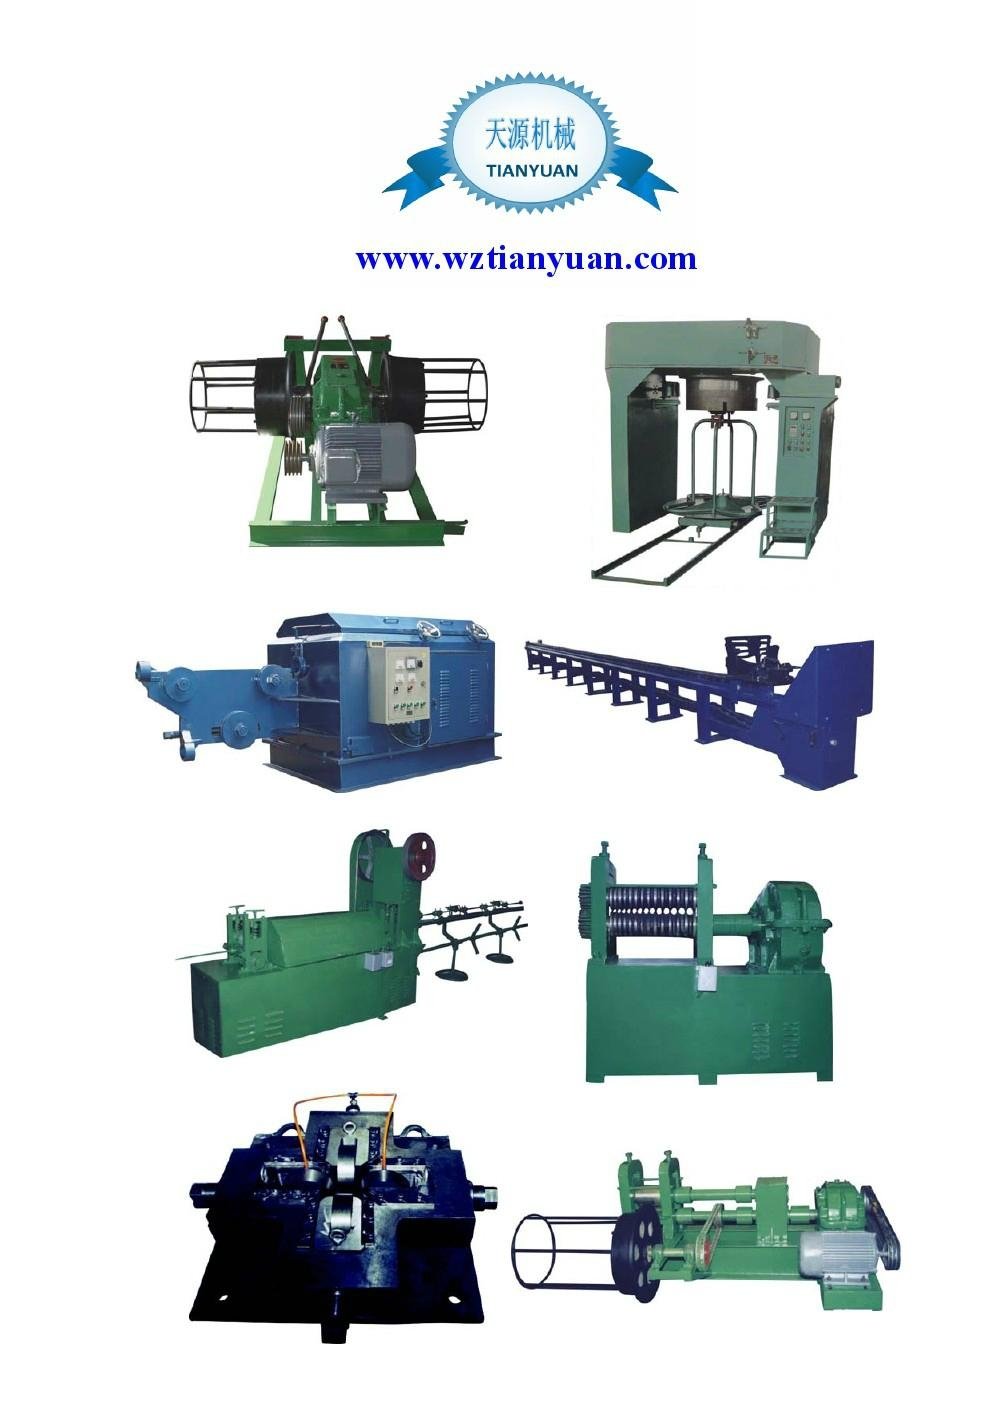 VERTICAL WIRE DRAWING MACHINE 2